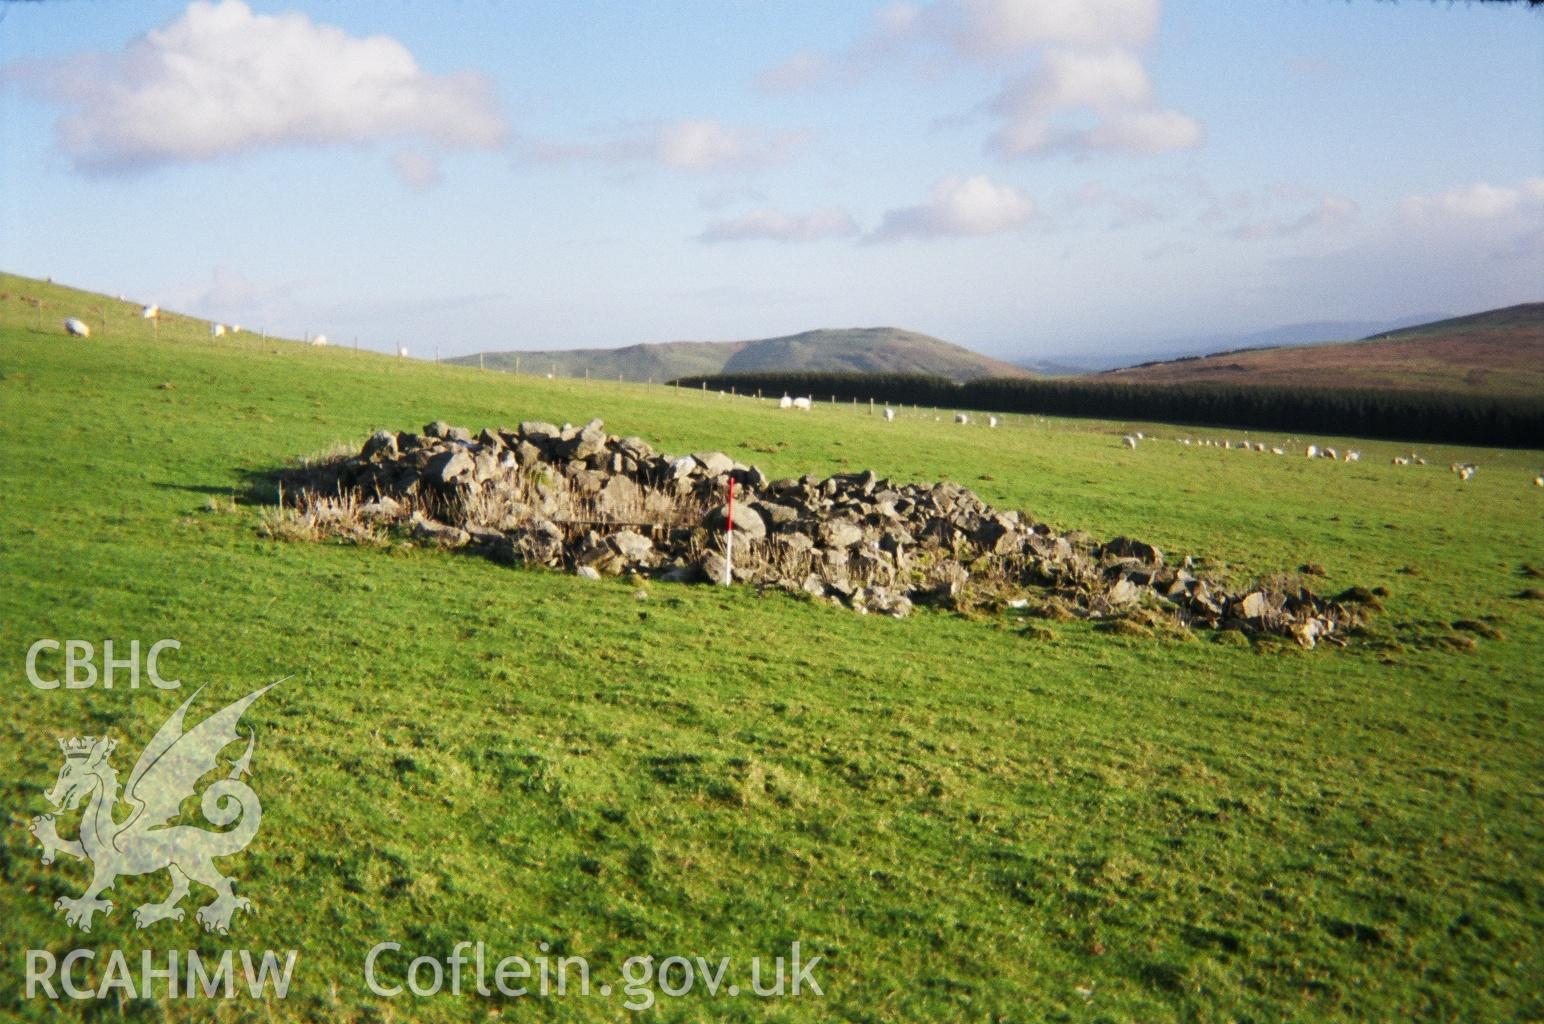 Digital colour photograph of Cwm Ffynnon clearance cairn III taken on 09/12/2006 by A.C. Roseveare during the Berwyn North East Upland Survey by Archaeophysica.